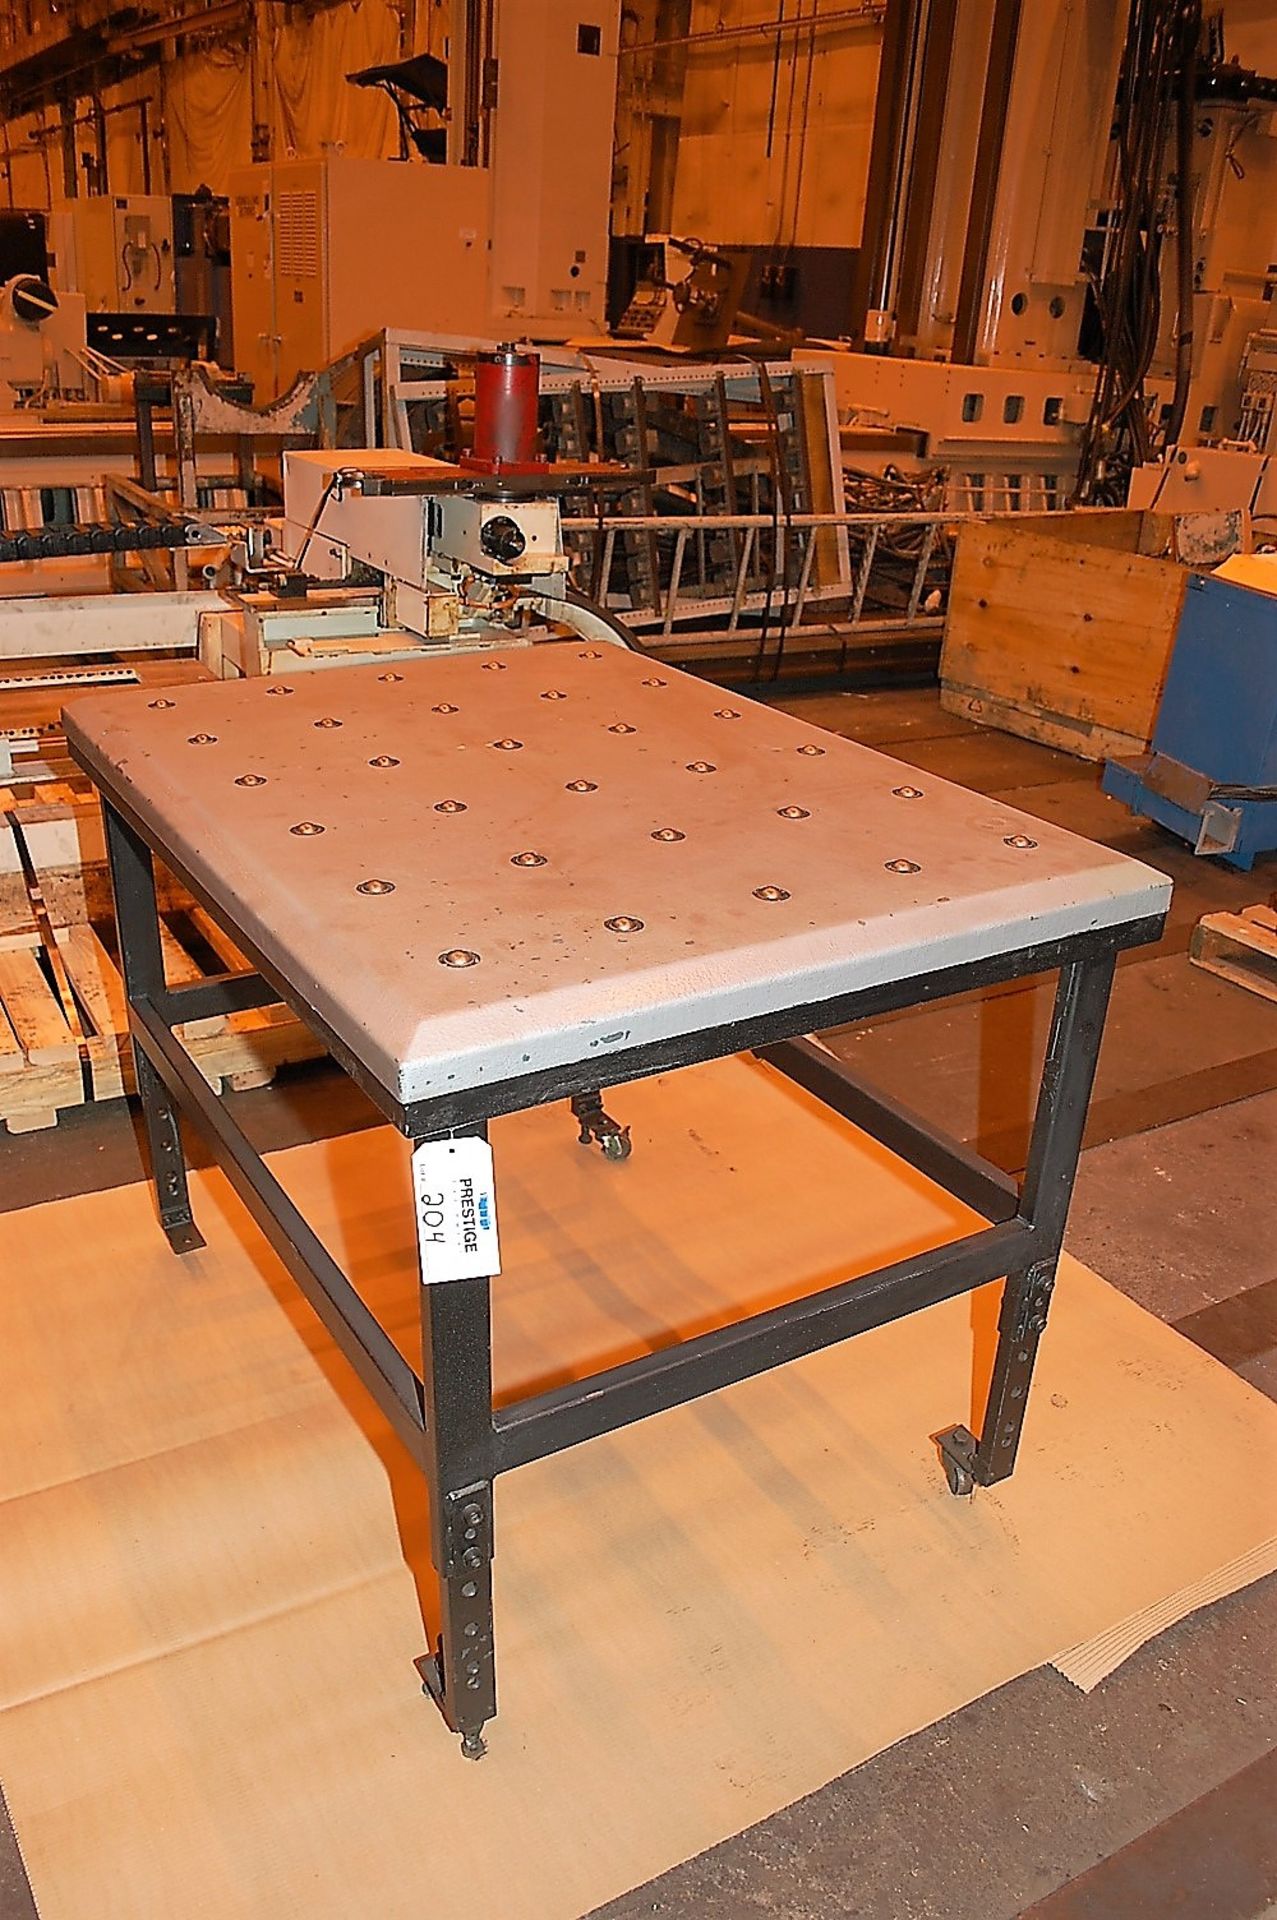 Adjustable Roller Table, 47.5’’L x 35.5’’W x 37.5’’H - Image 2 of 2